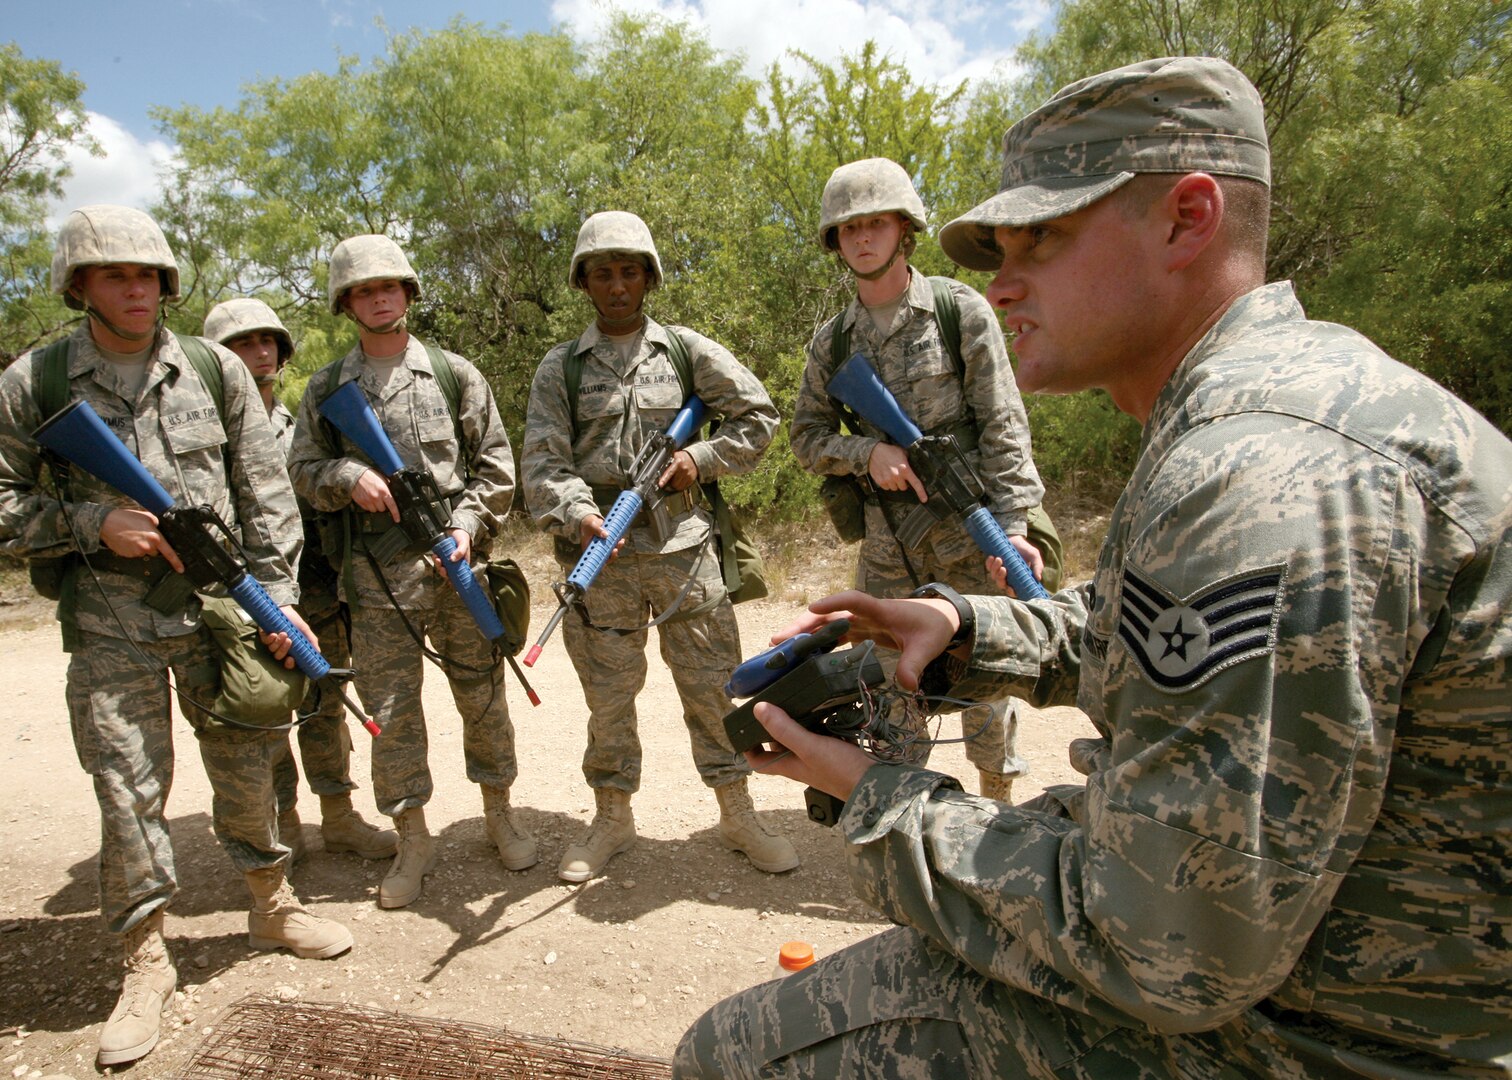 6/9/2008 - Staff Sgt. Andrew Crabtree, 37th Training Support Squadron, discusses a simulated explosive with basic trainees.  Each time students encounter a simulated explosive, instructors analyze and discuss it with the training group, covering the specific location, type and situation to heighten IED awareness.
(USAF photo by Robbin Cresswell)